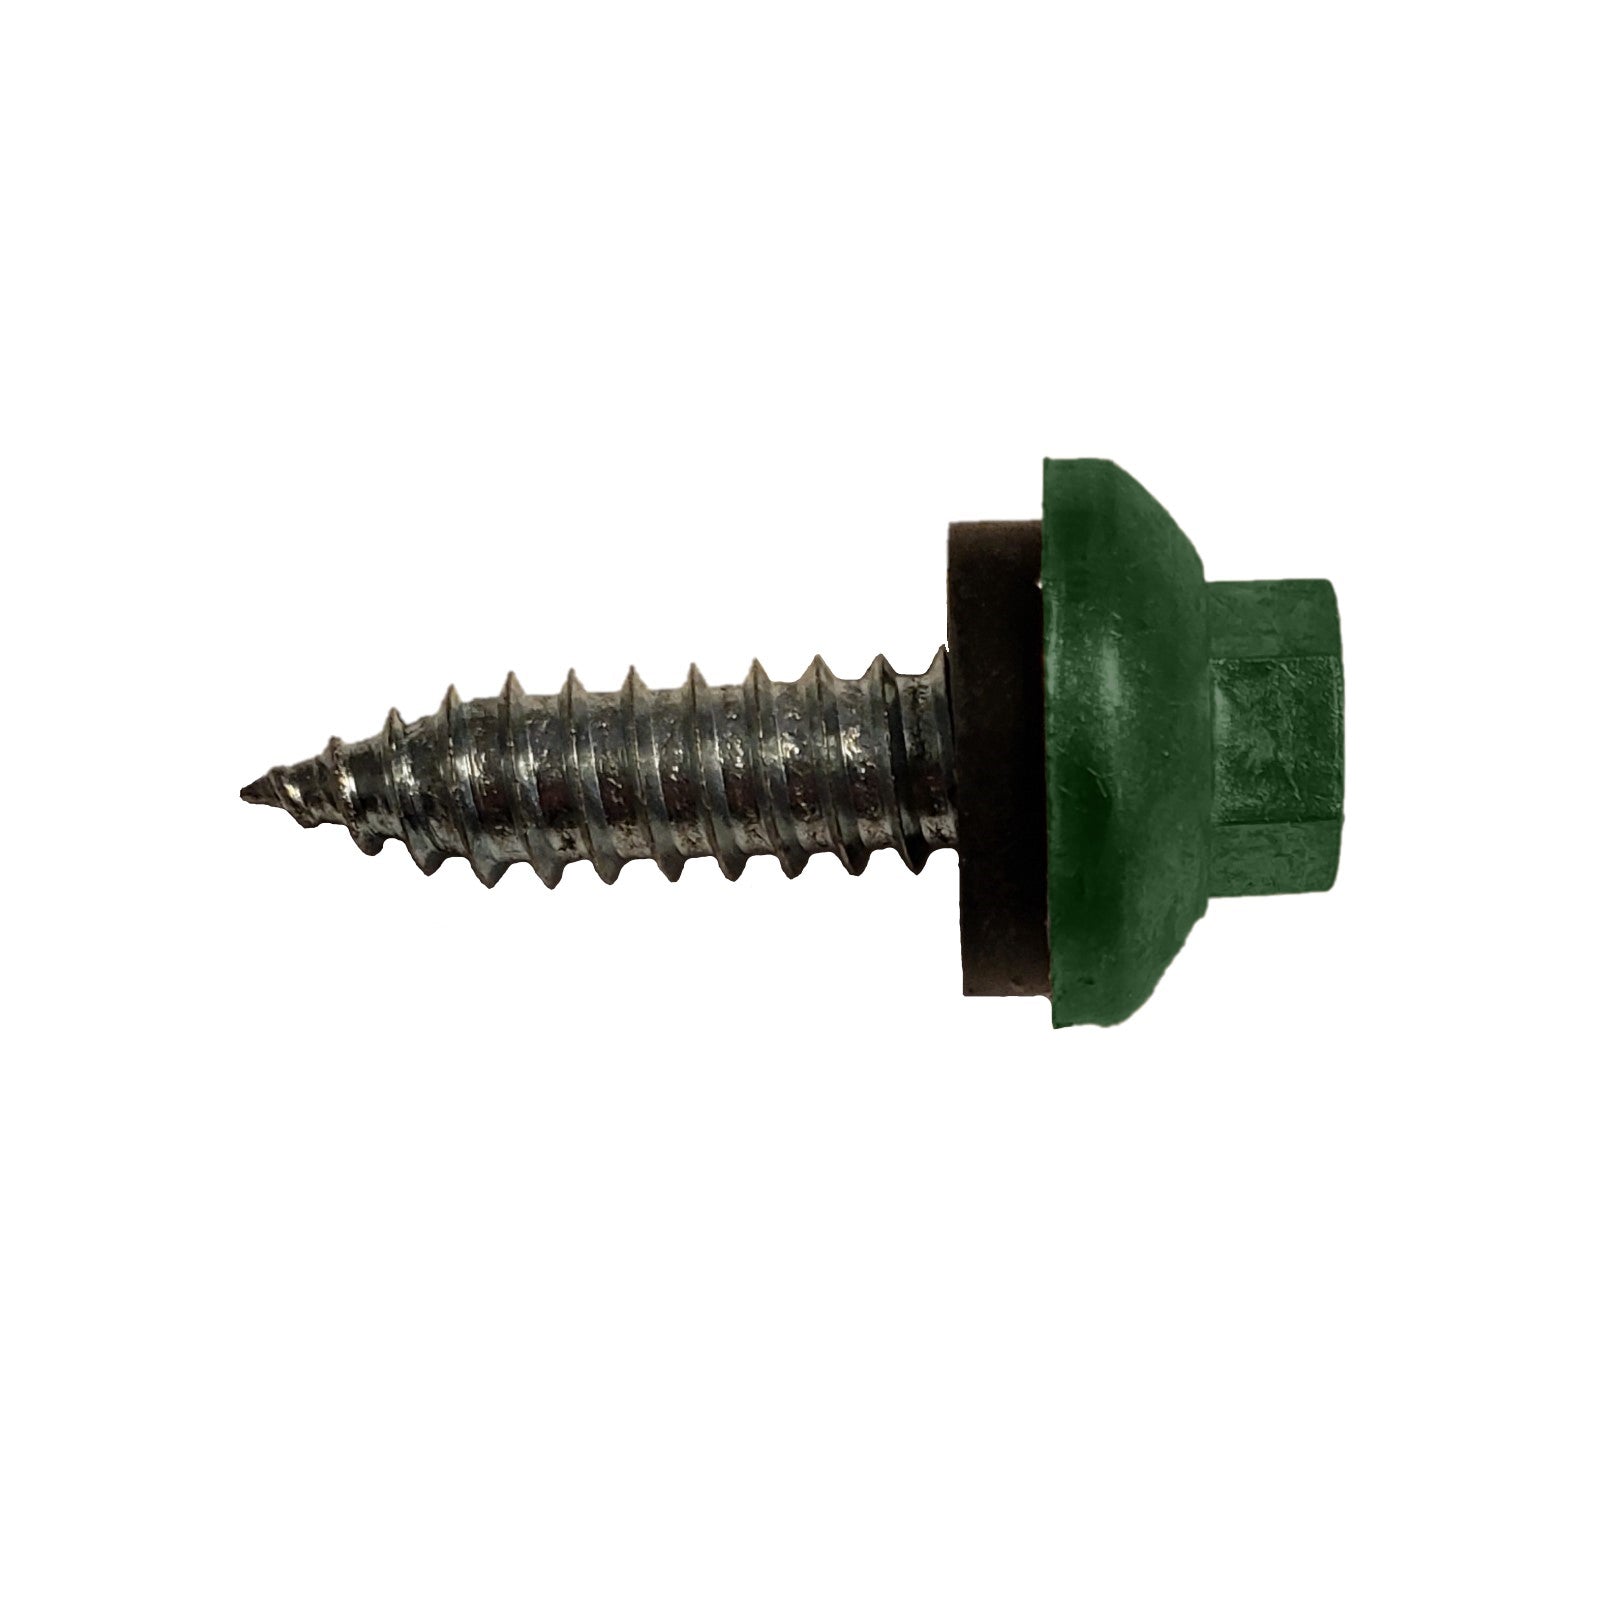 #14 x 1 inch ZXL Tapping Steelbinder Metal Roofing Screw Forest Green Pkg 250